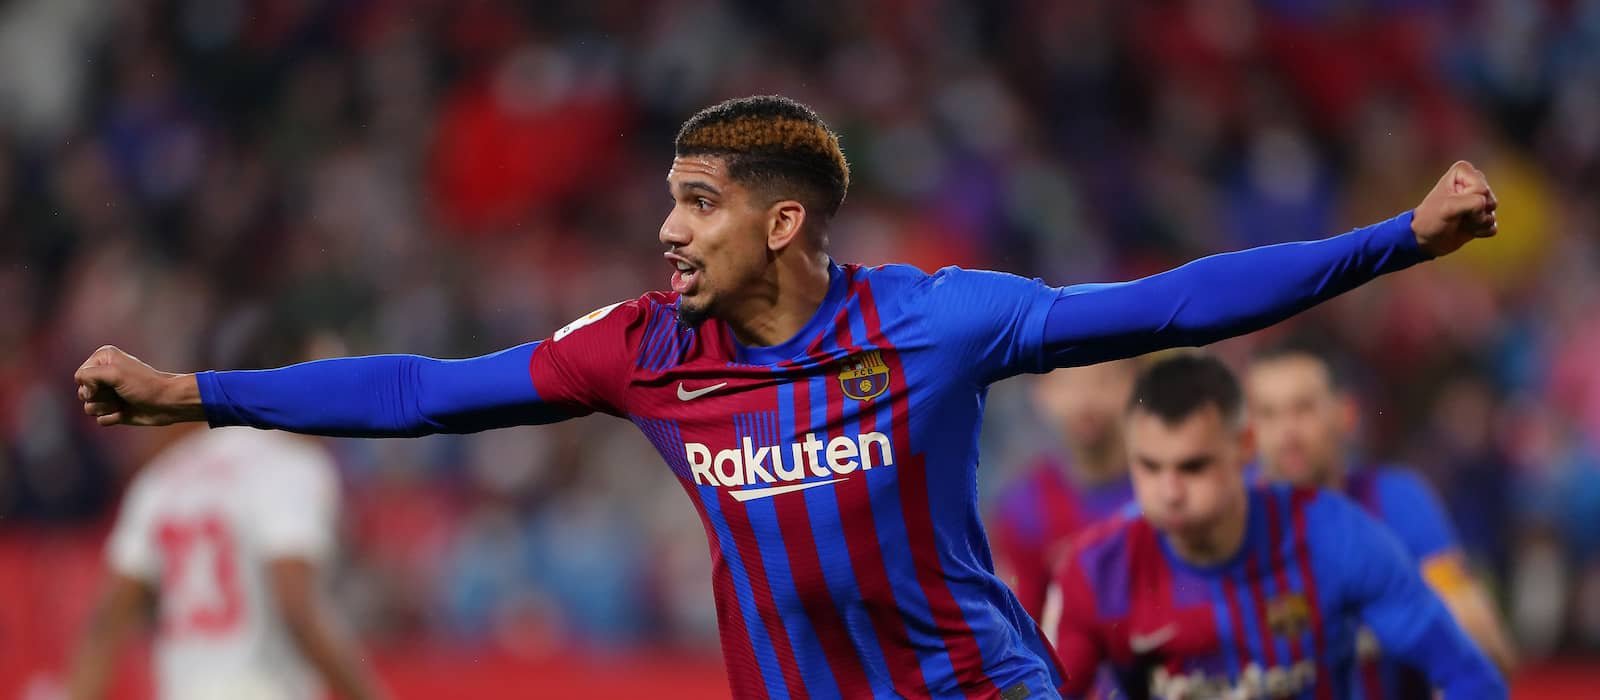 Man United to face stiff competition from Chelsea for Ronald Araujo - Man United News And Transfer News